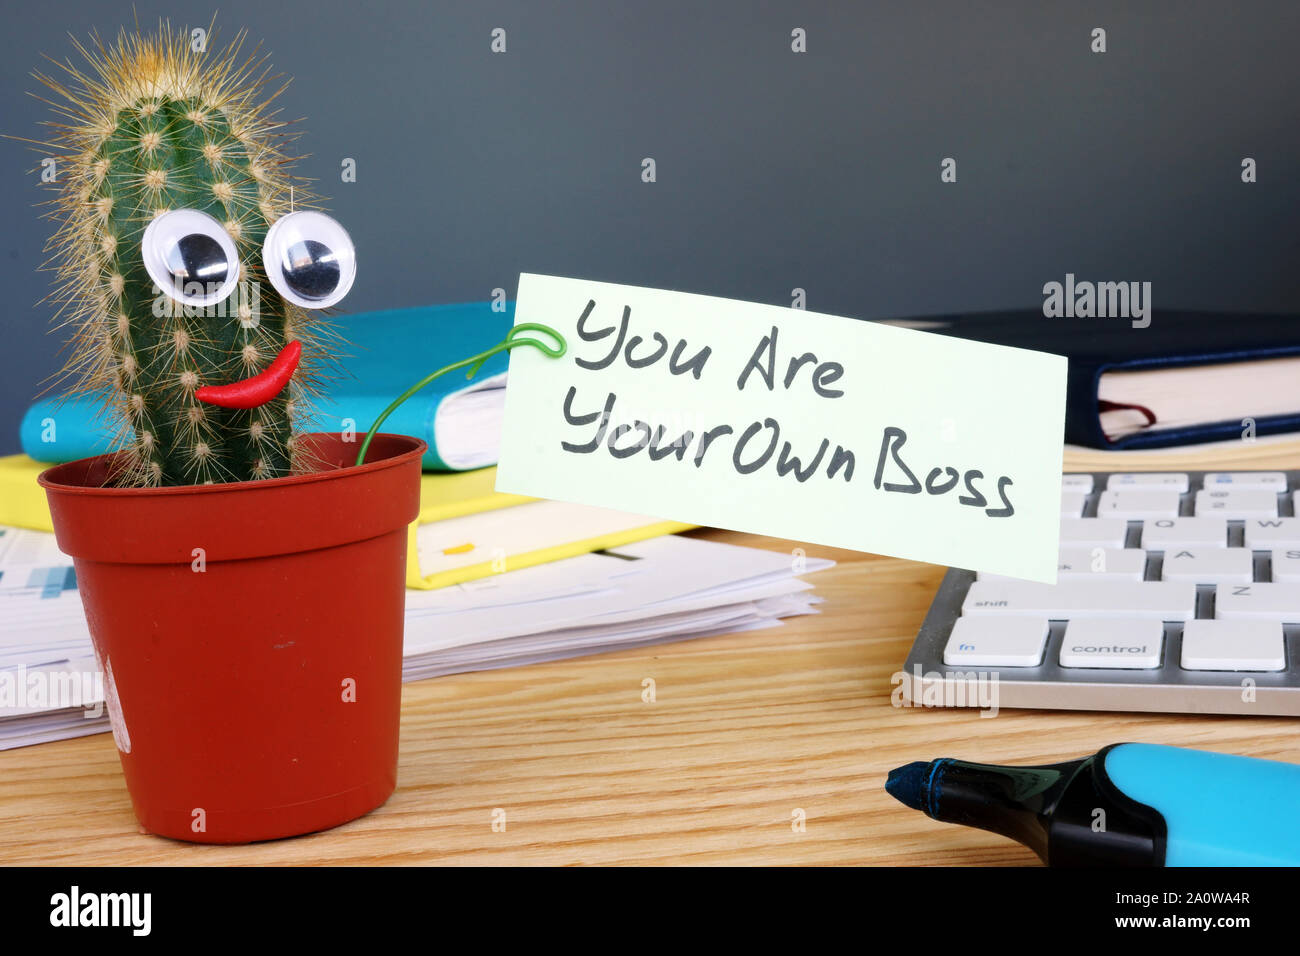 You are your own boss sign on the desk. Stock Photo